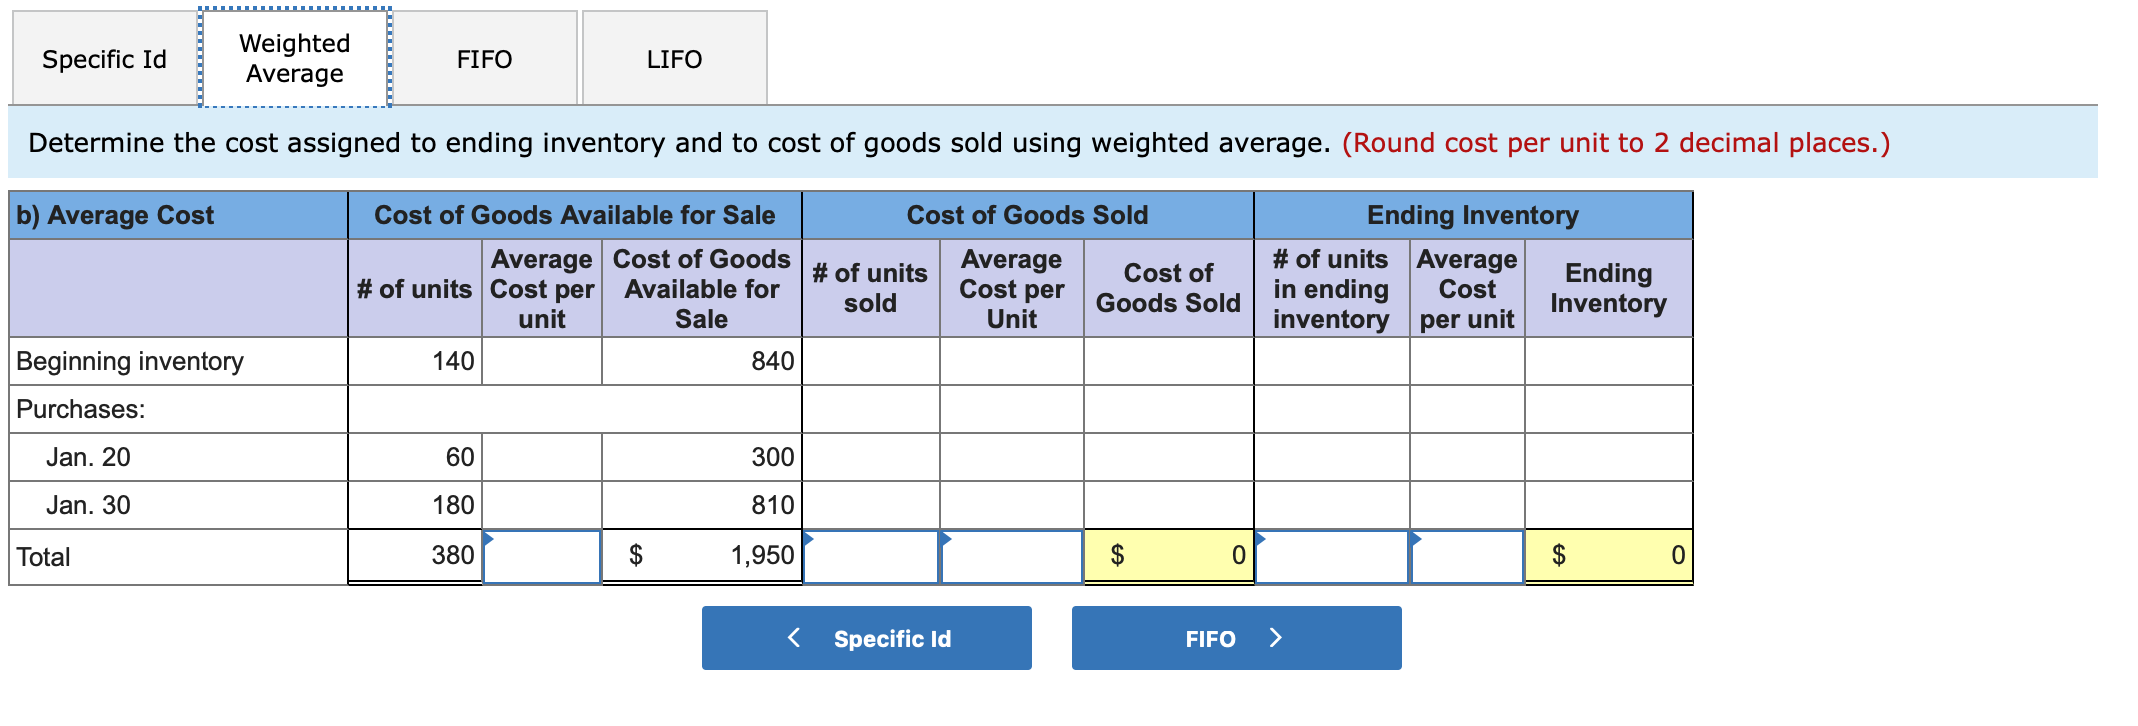 Weighted
Average
Specific Id
FIFO
LIFO
Determine the cost assigned to ending inventory and to cost of goods sold using weighted average. (Round cost per unit to 2 decimal places.)
b) Average Cost
Cost of Goods Available for Sale
Cost of Goods Sold
Ending Inventory
Average Cost of Goods |# of units
# of units Average
in ending
inventory per unit
Average
Cost per
Unit
Ending
Inventory
Cost of
# of units Cost per
unit
Available for
Cost
sold
Goods Sold
Sale
Beginning inventory
140
840
Purchases:
Jan. 20
60
300
Jan. 30
180
810
$
$
$
Total
380
1,950
Specific Id
FIFO
EA
